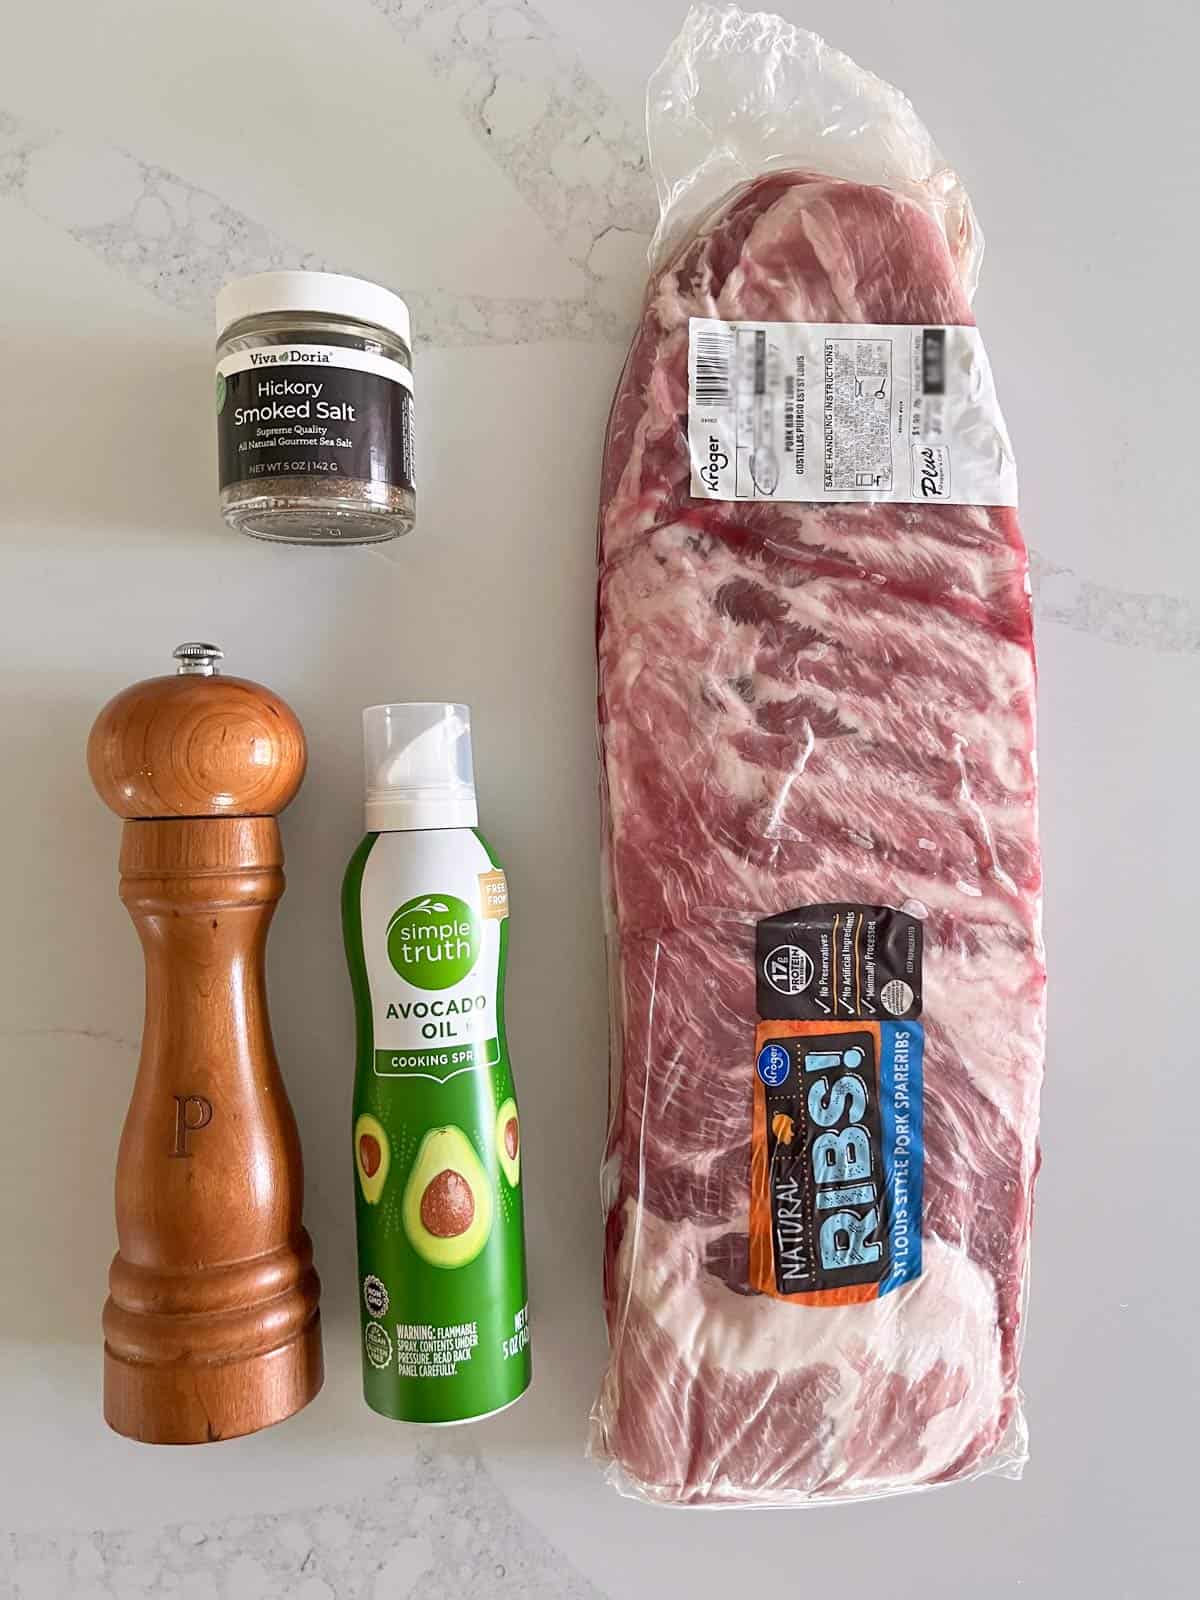 The ingredients needed to make oven baked ribs.